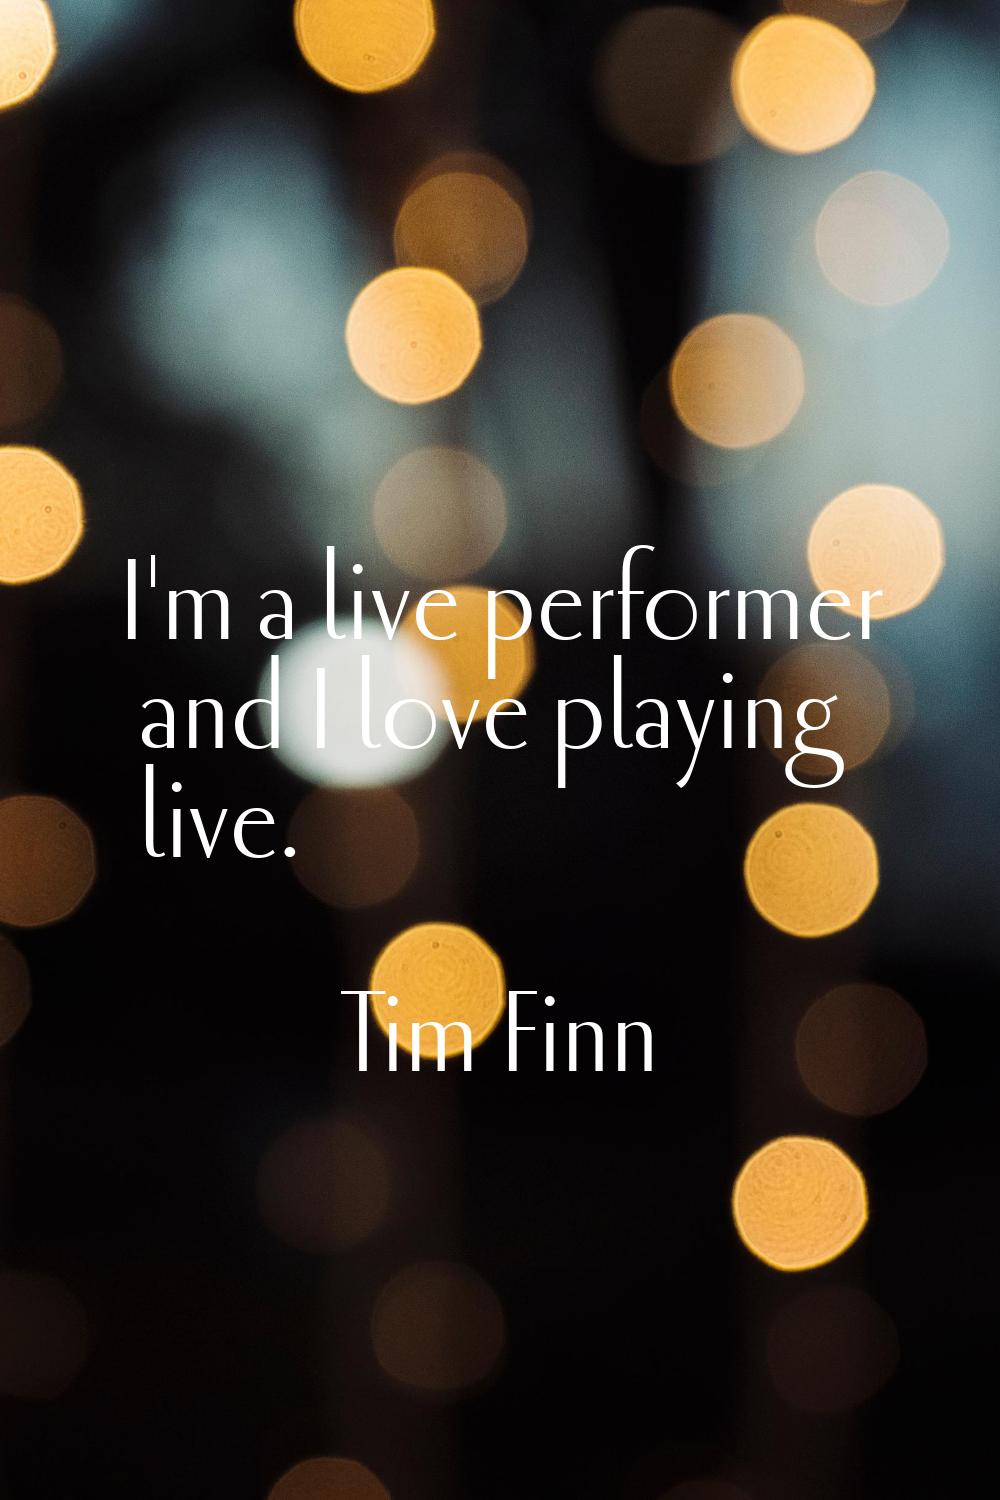 I'm a live performer and I love playing live.